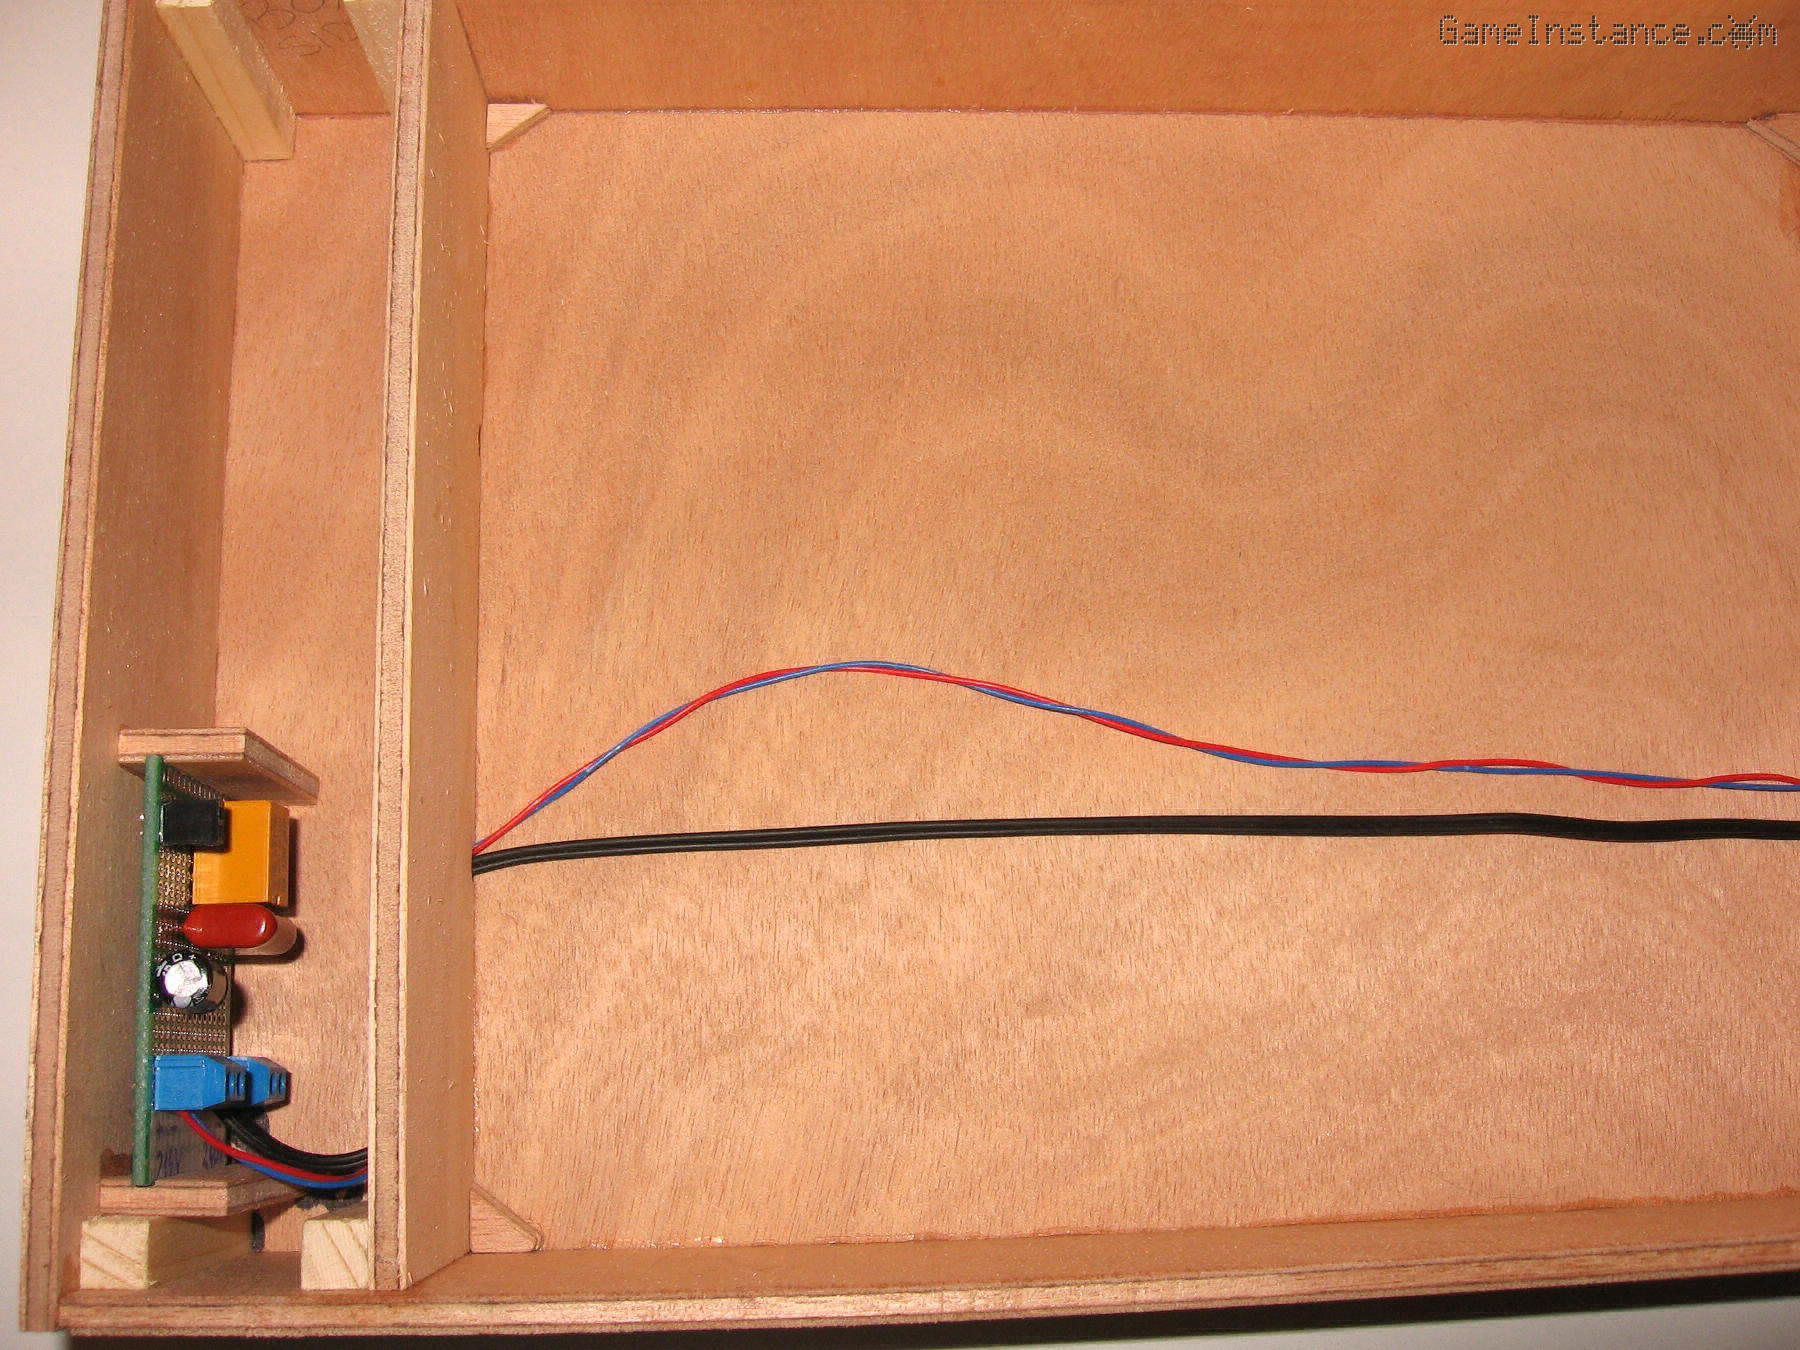 UV-Box - Wiring the bottom side. The high voltage electronics PCB can be observed on the left side compartment.